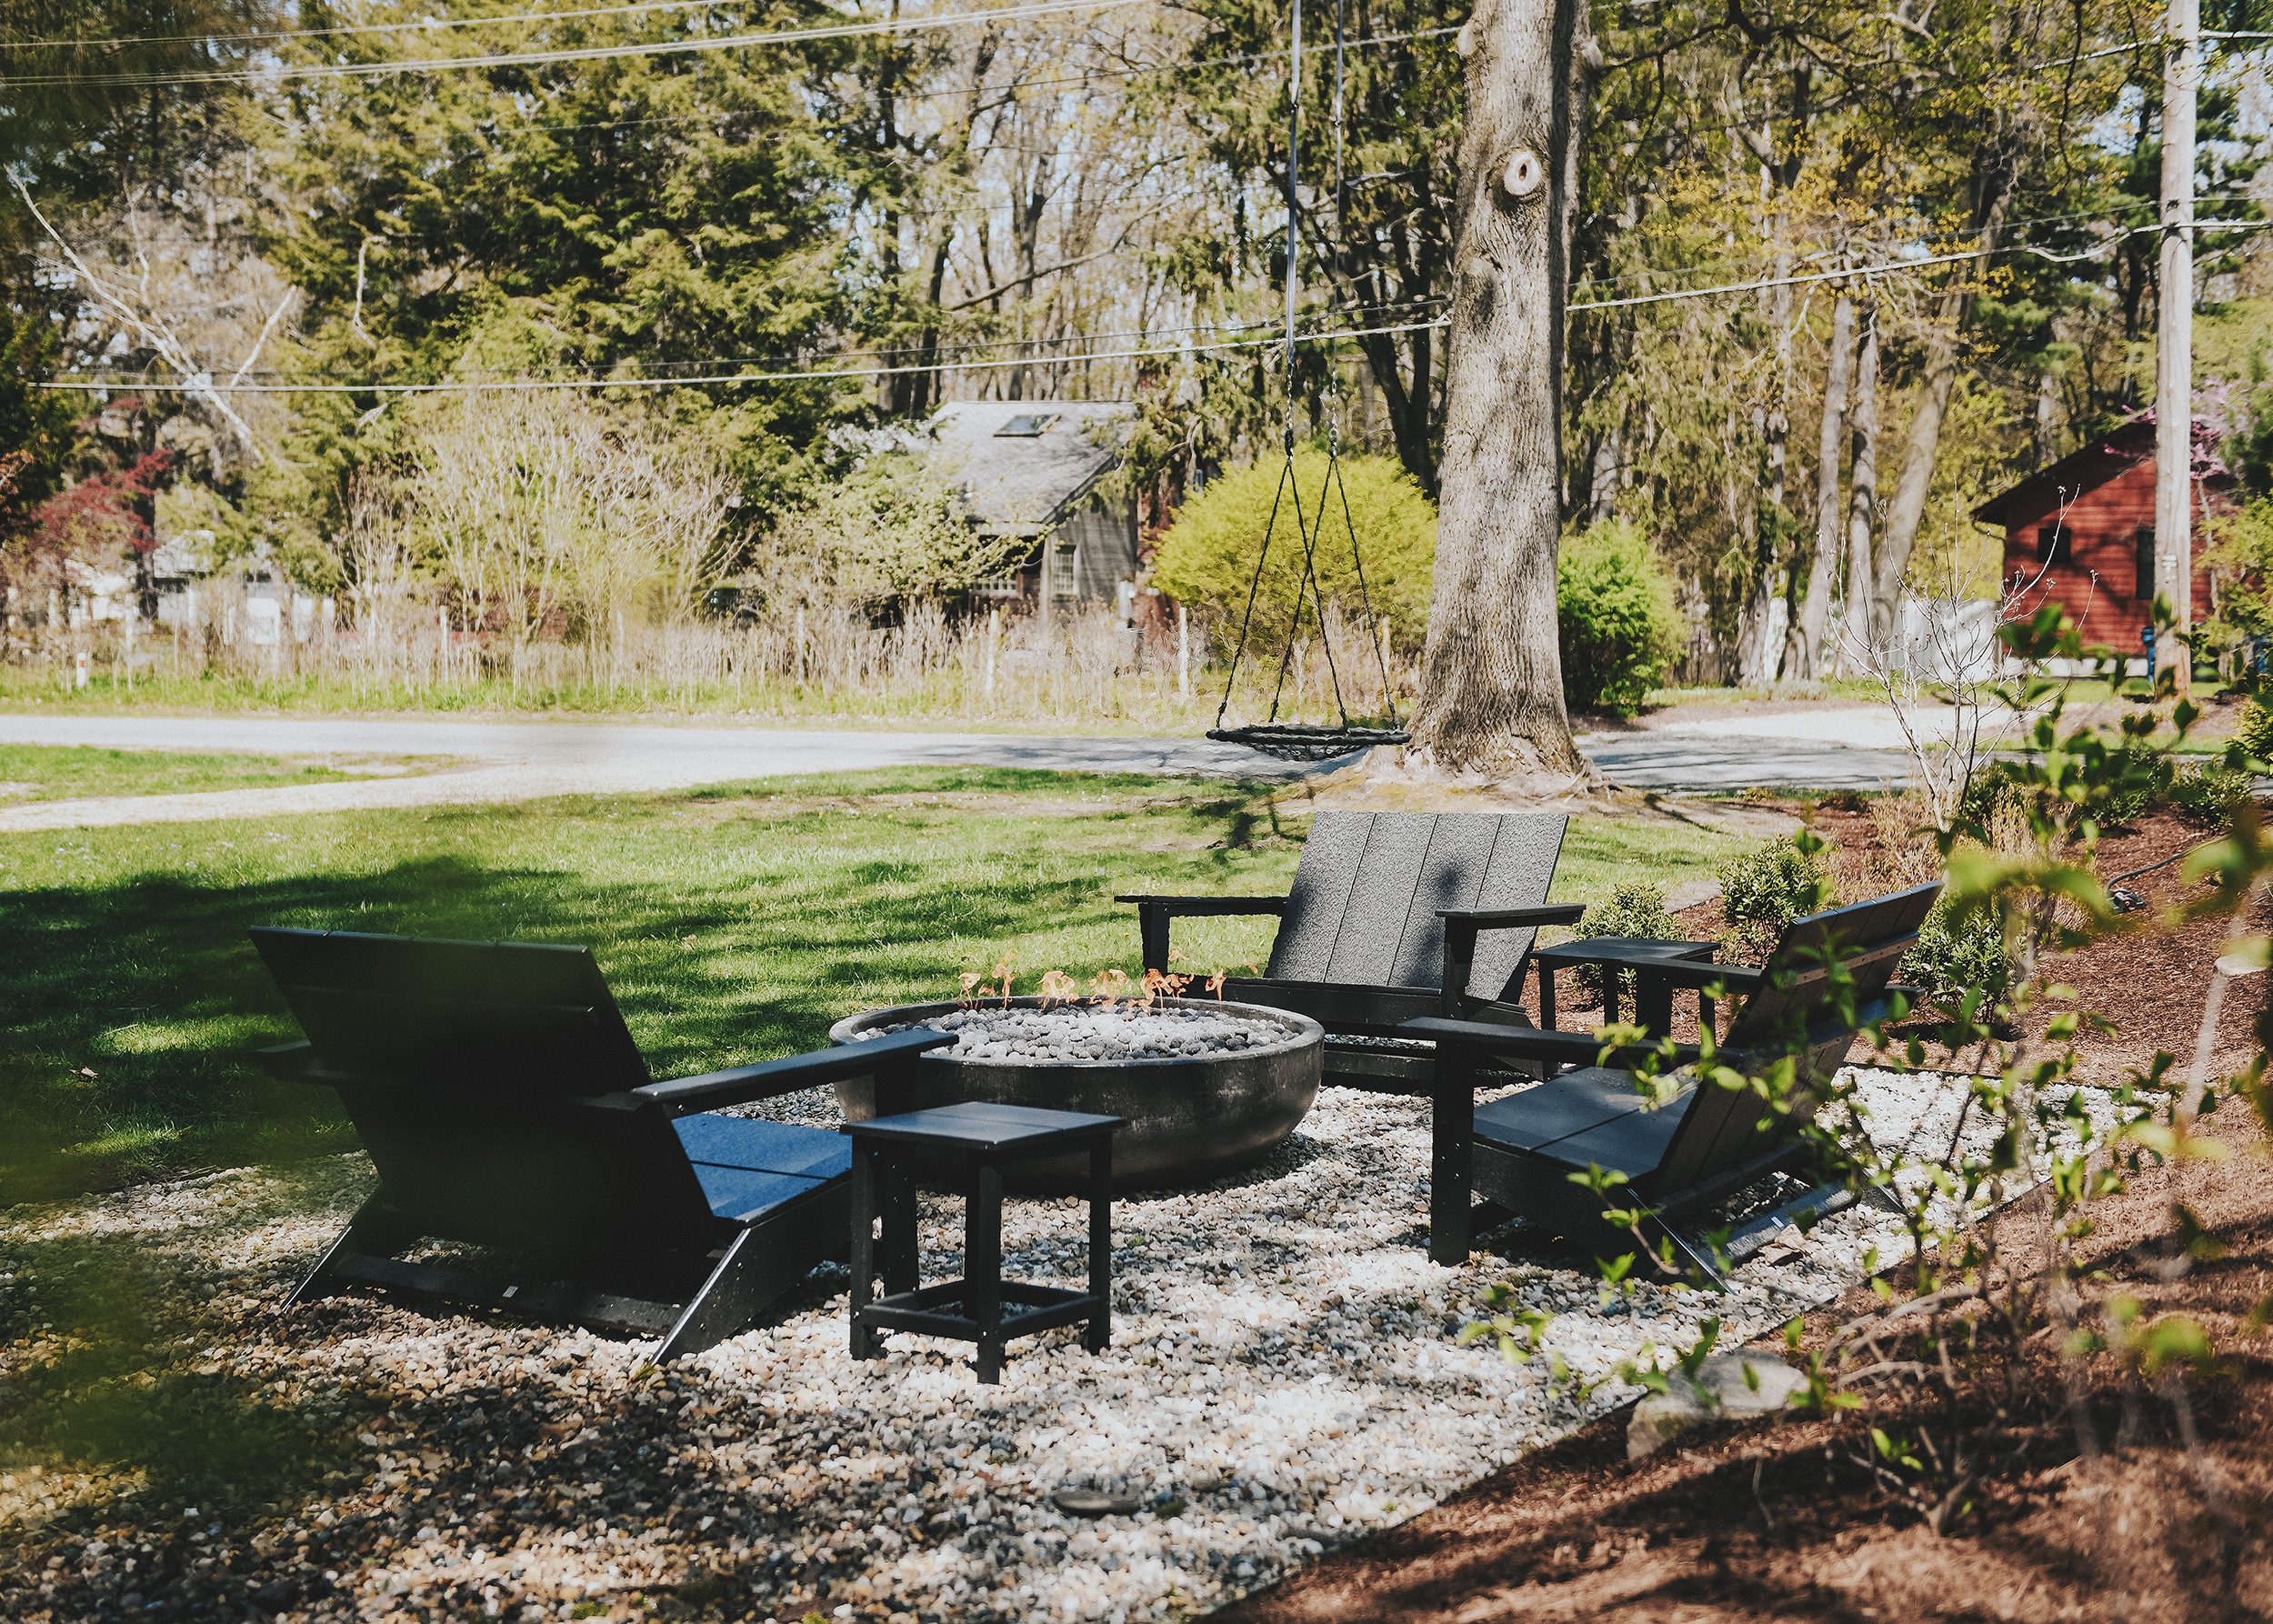  the new outdoor furniture after completing the landscaping project  // via Yellow Brick Home